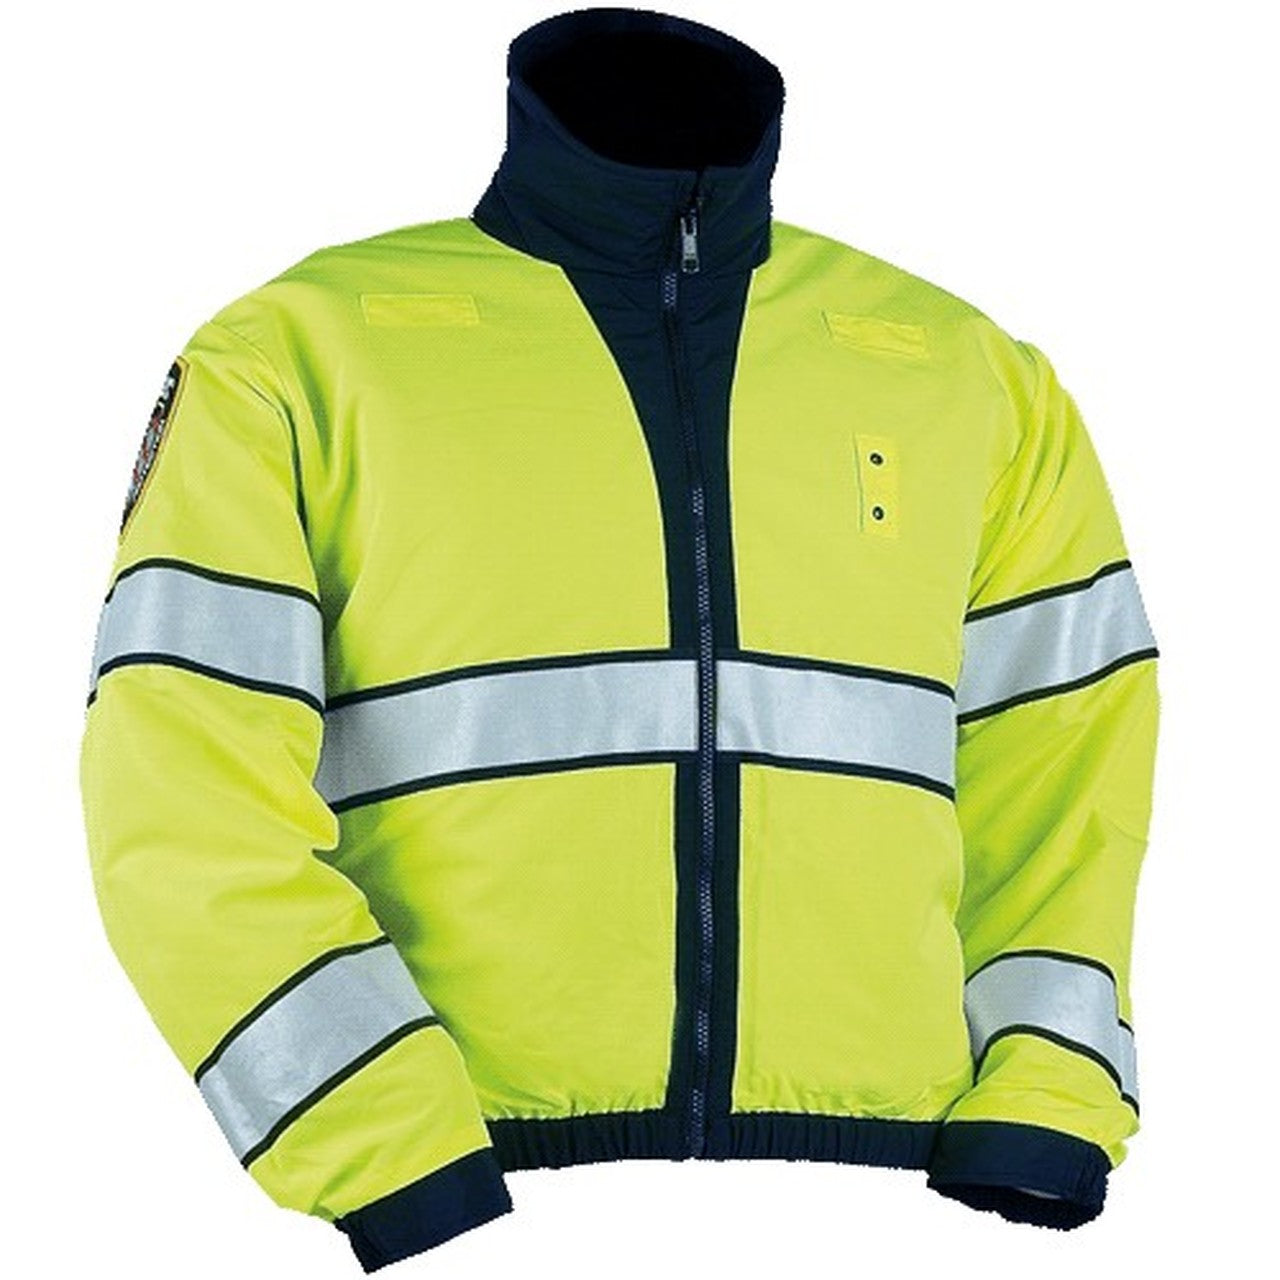 the Police Public Safety | High-Vis Reversible Safety Green and Black Windbreaker | Scotchlite Ike-Length Reflective Bomber Jacket has a neon yellow outside and a black reverse side